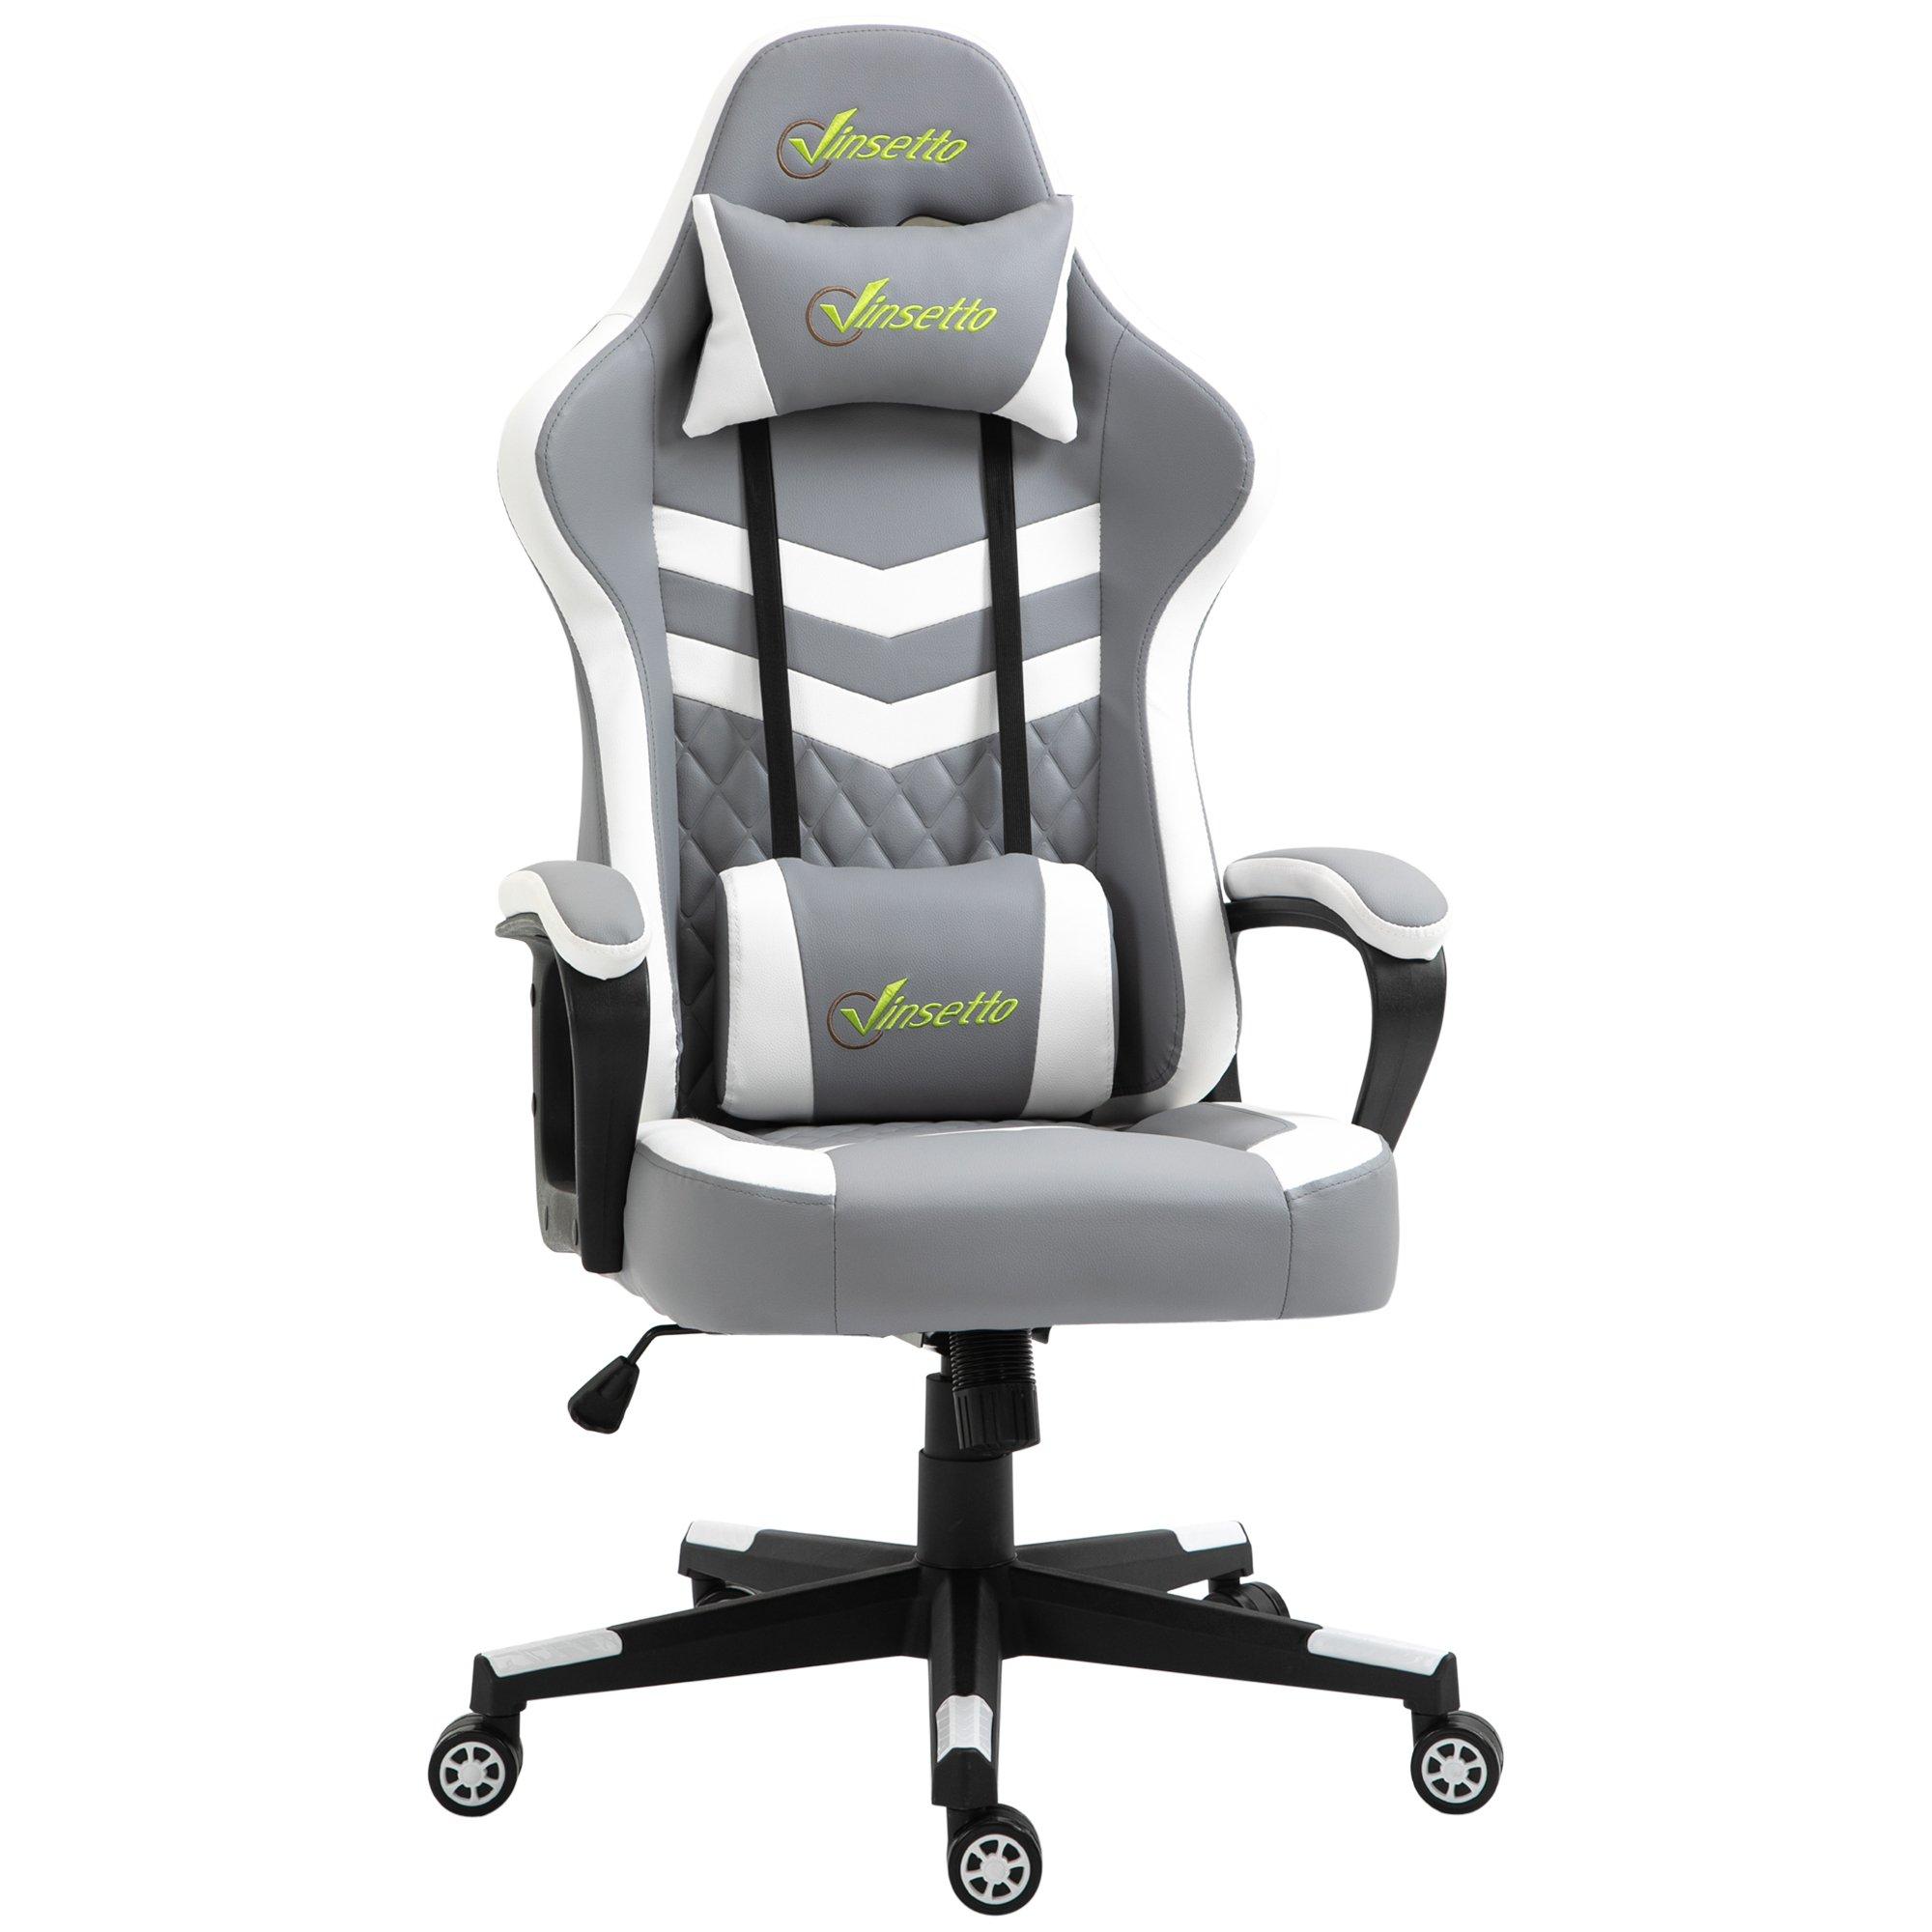 Racing Gaming Chair with Lumbar Support, Headrest, Gamer Office Chair